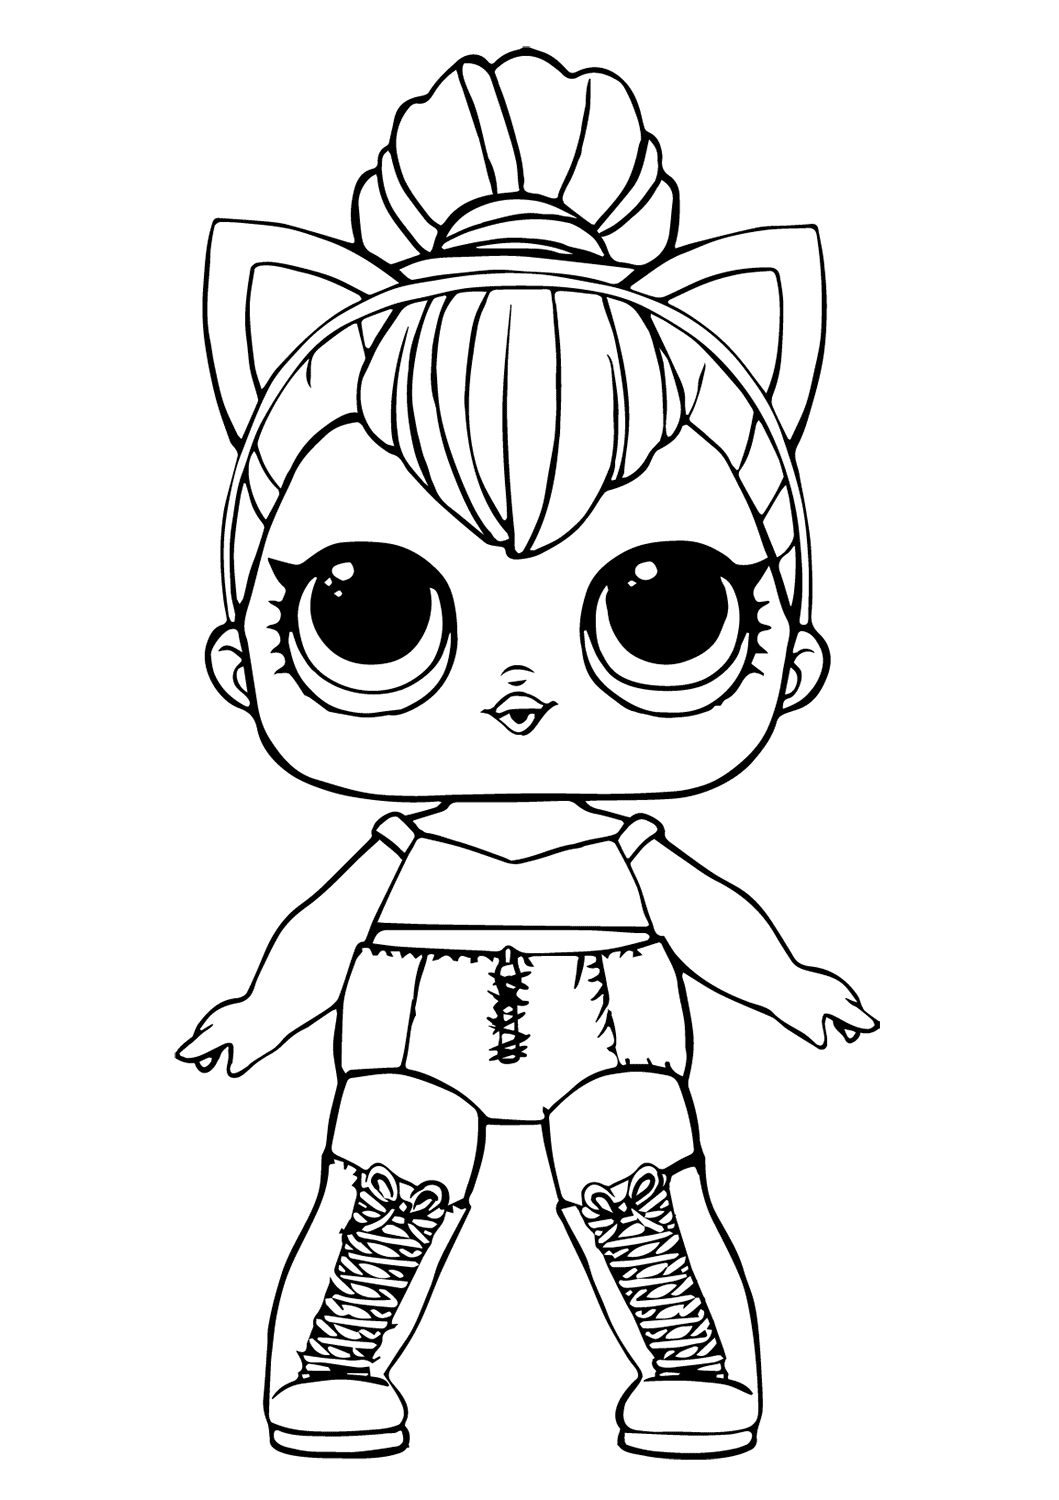 Kitty Queen Lol Doll Coloring Page   Free Printable Coloring Pages ...